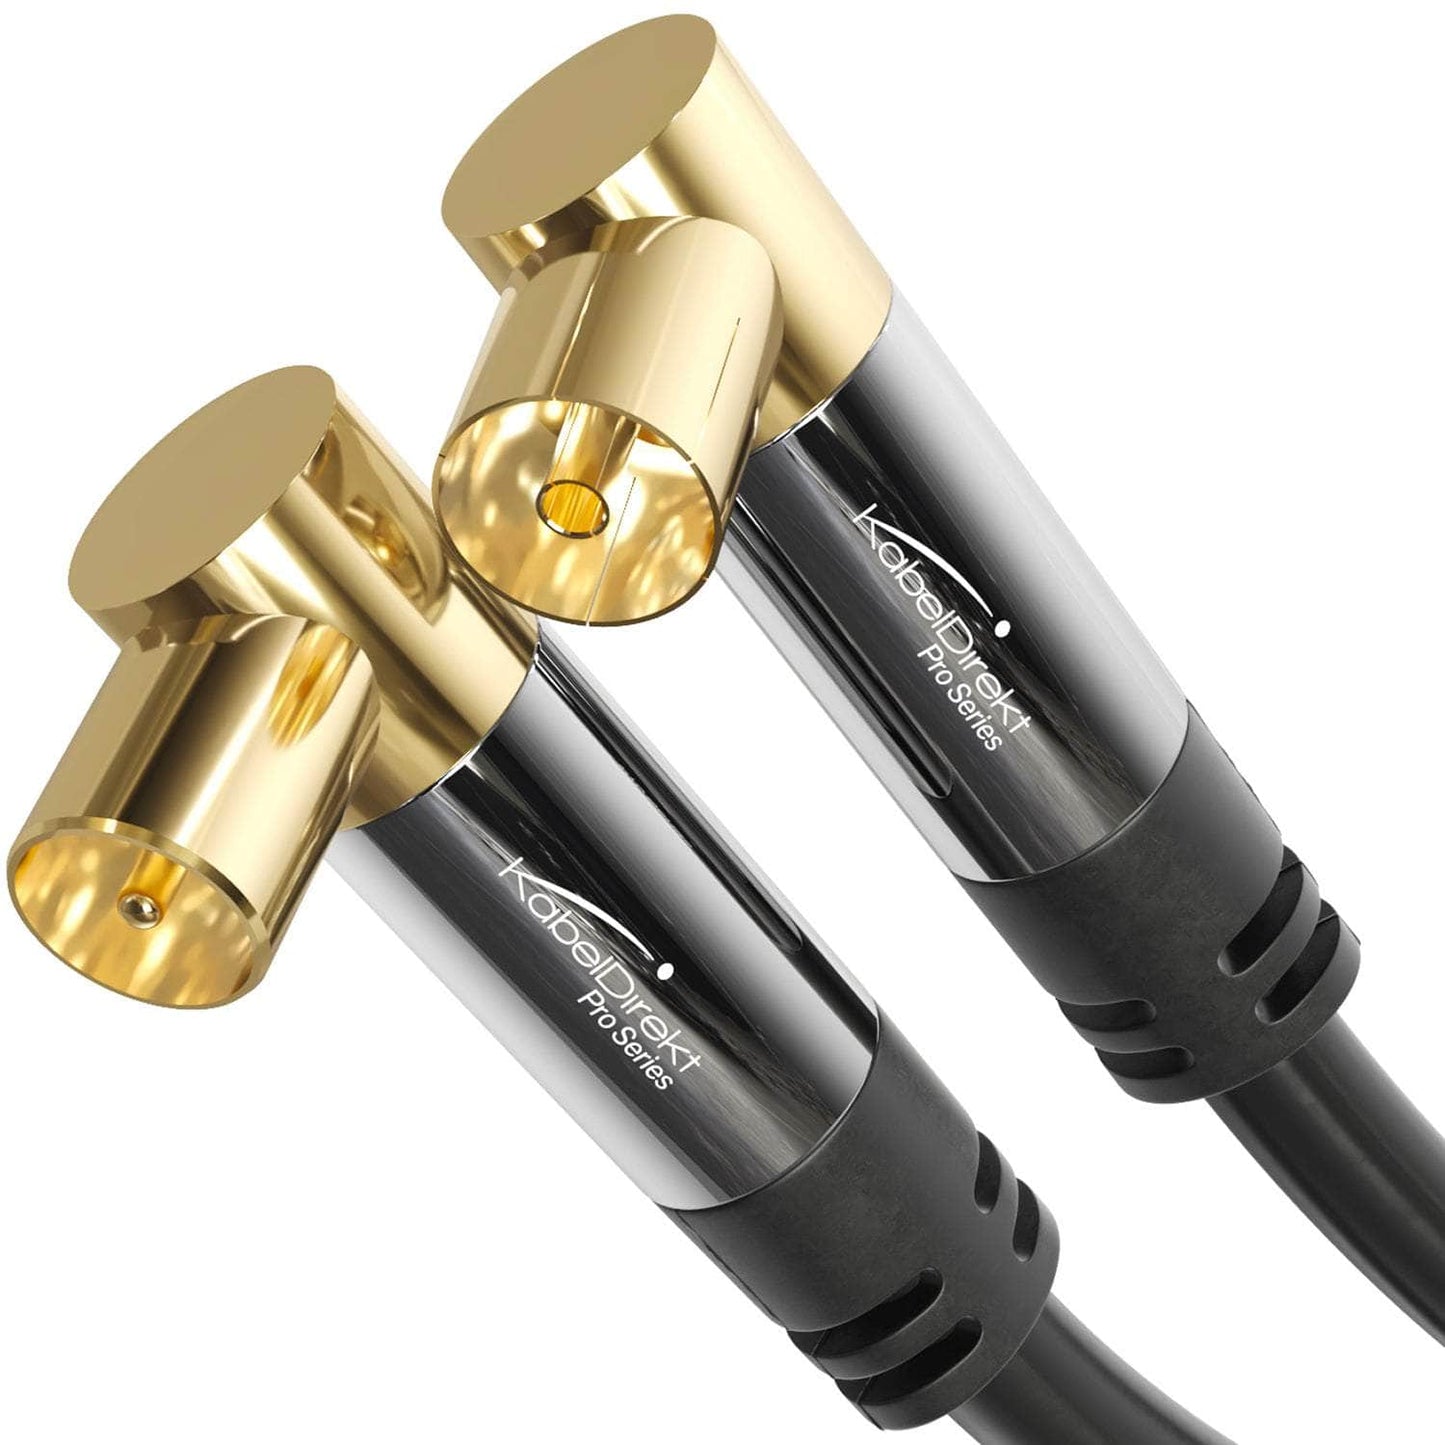 HDTV aerial / coaxial cable, 90° angled female connector to angled male connector